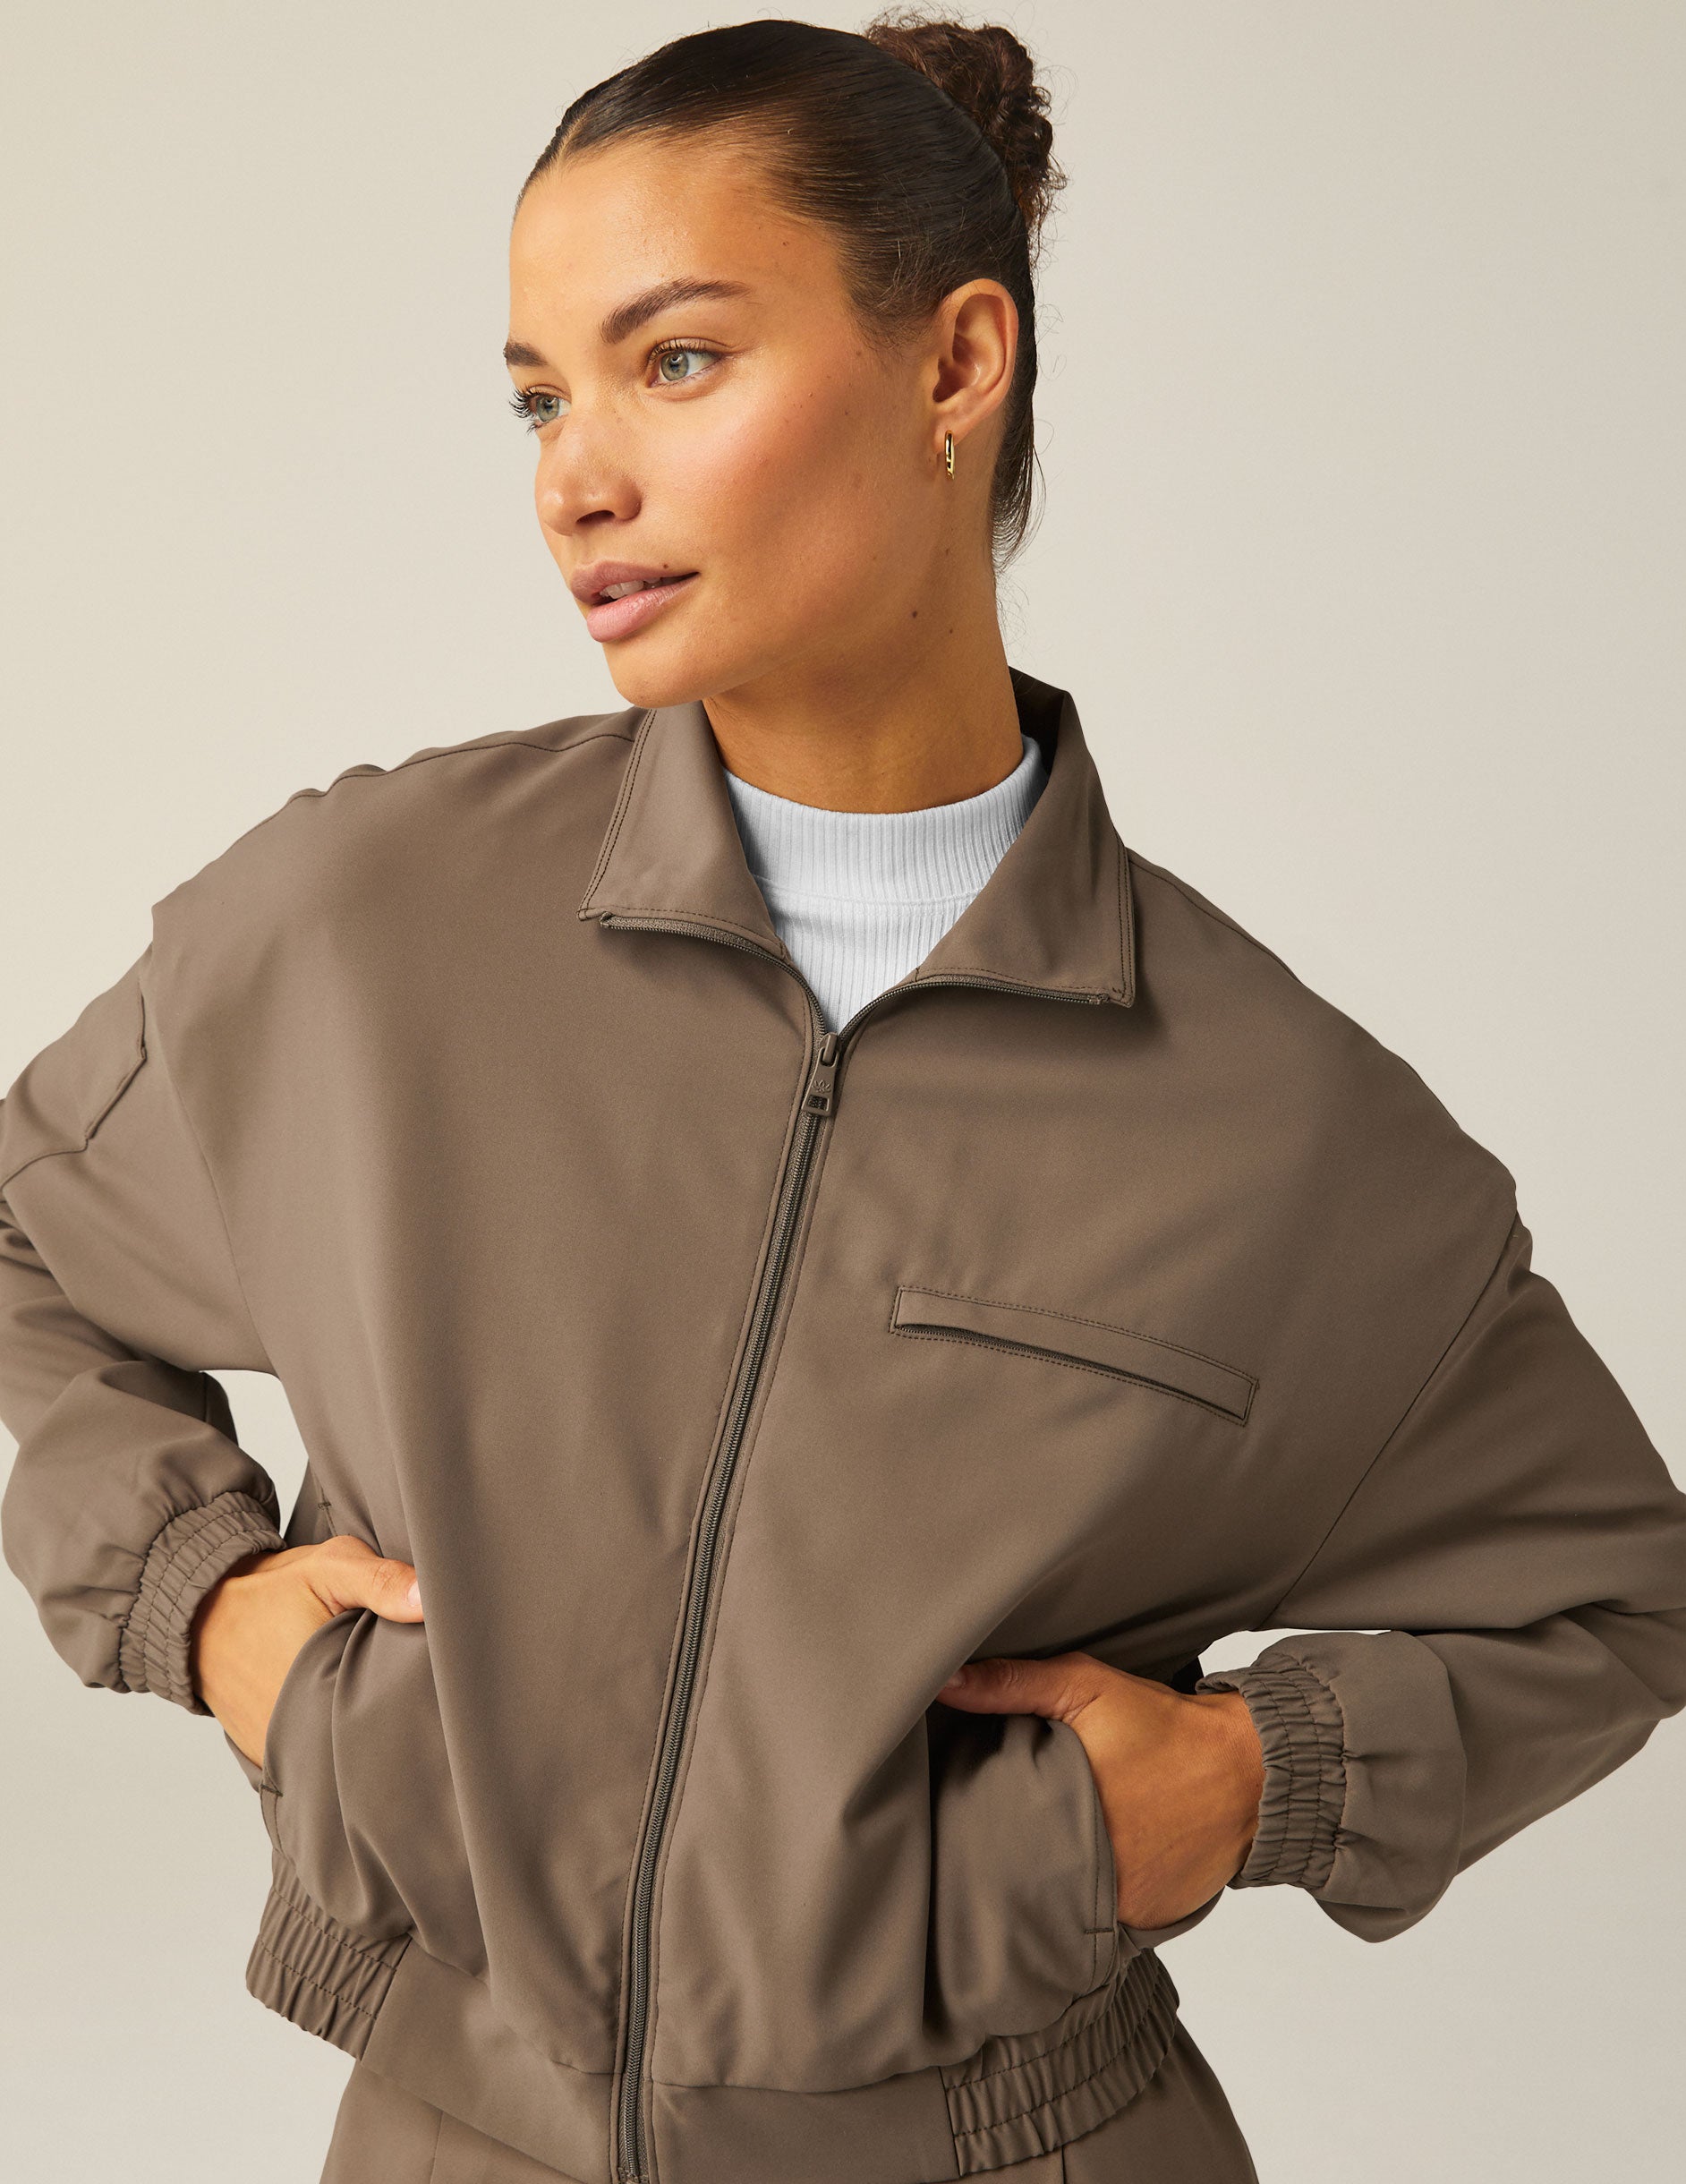 brown zip-up jetstretch woven jacket with a collar and pockets. 